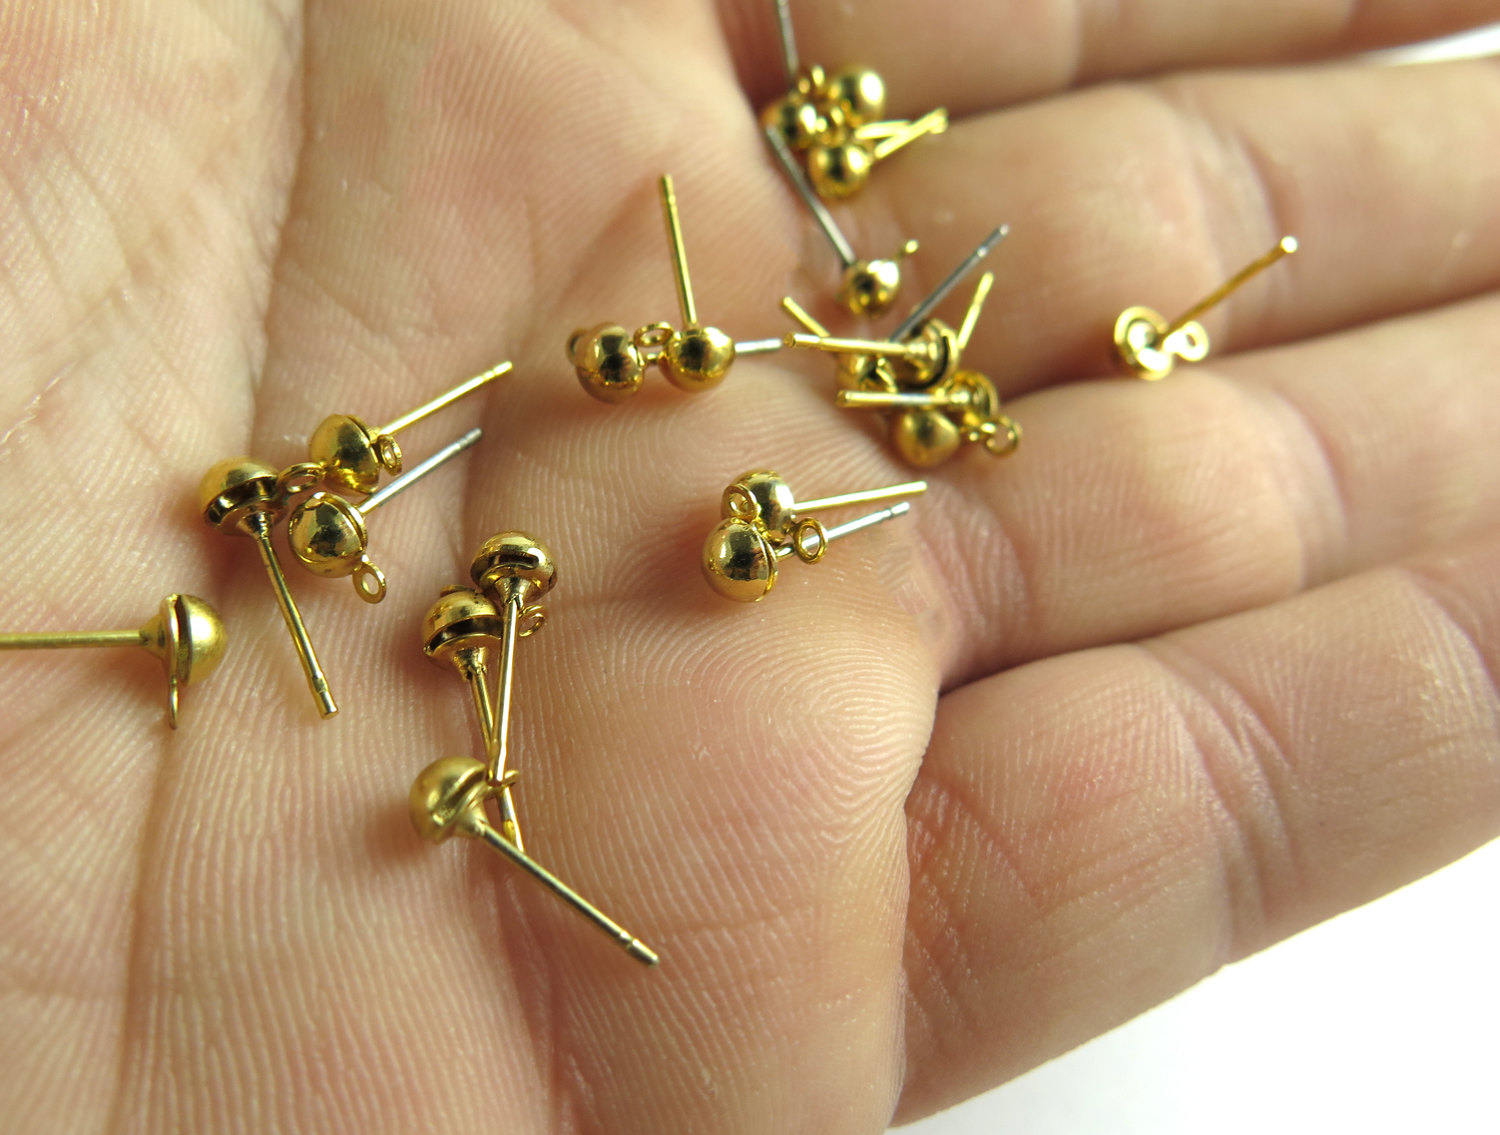 Gold Plated Domed Stud Earring Findings